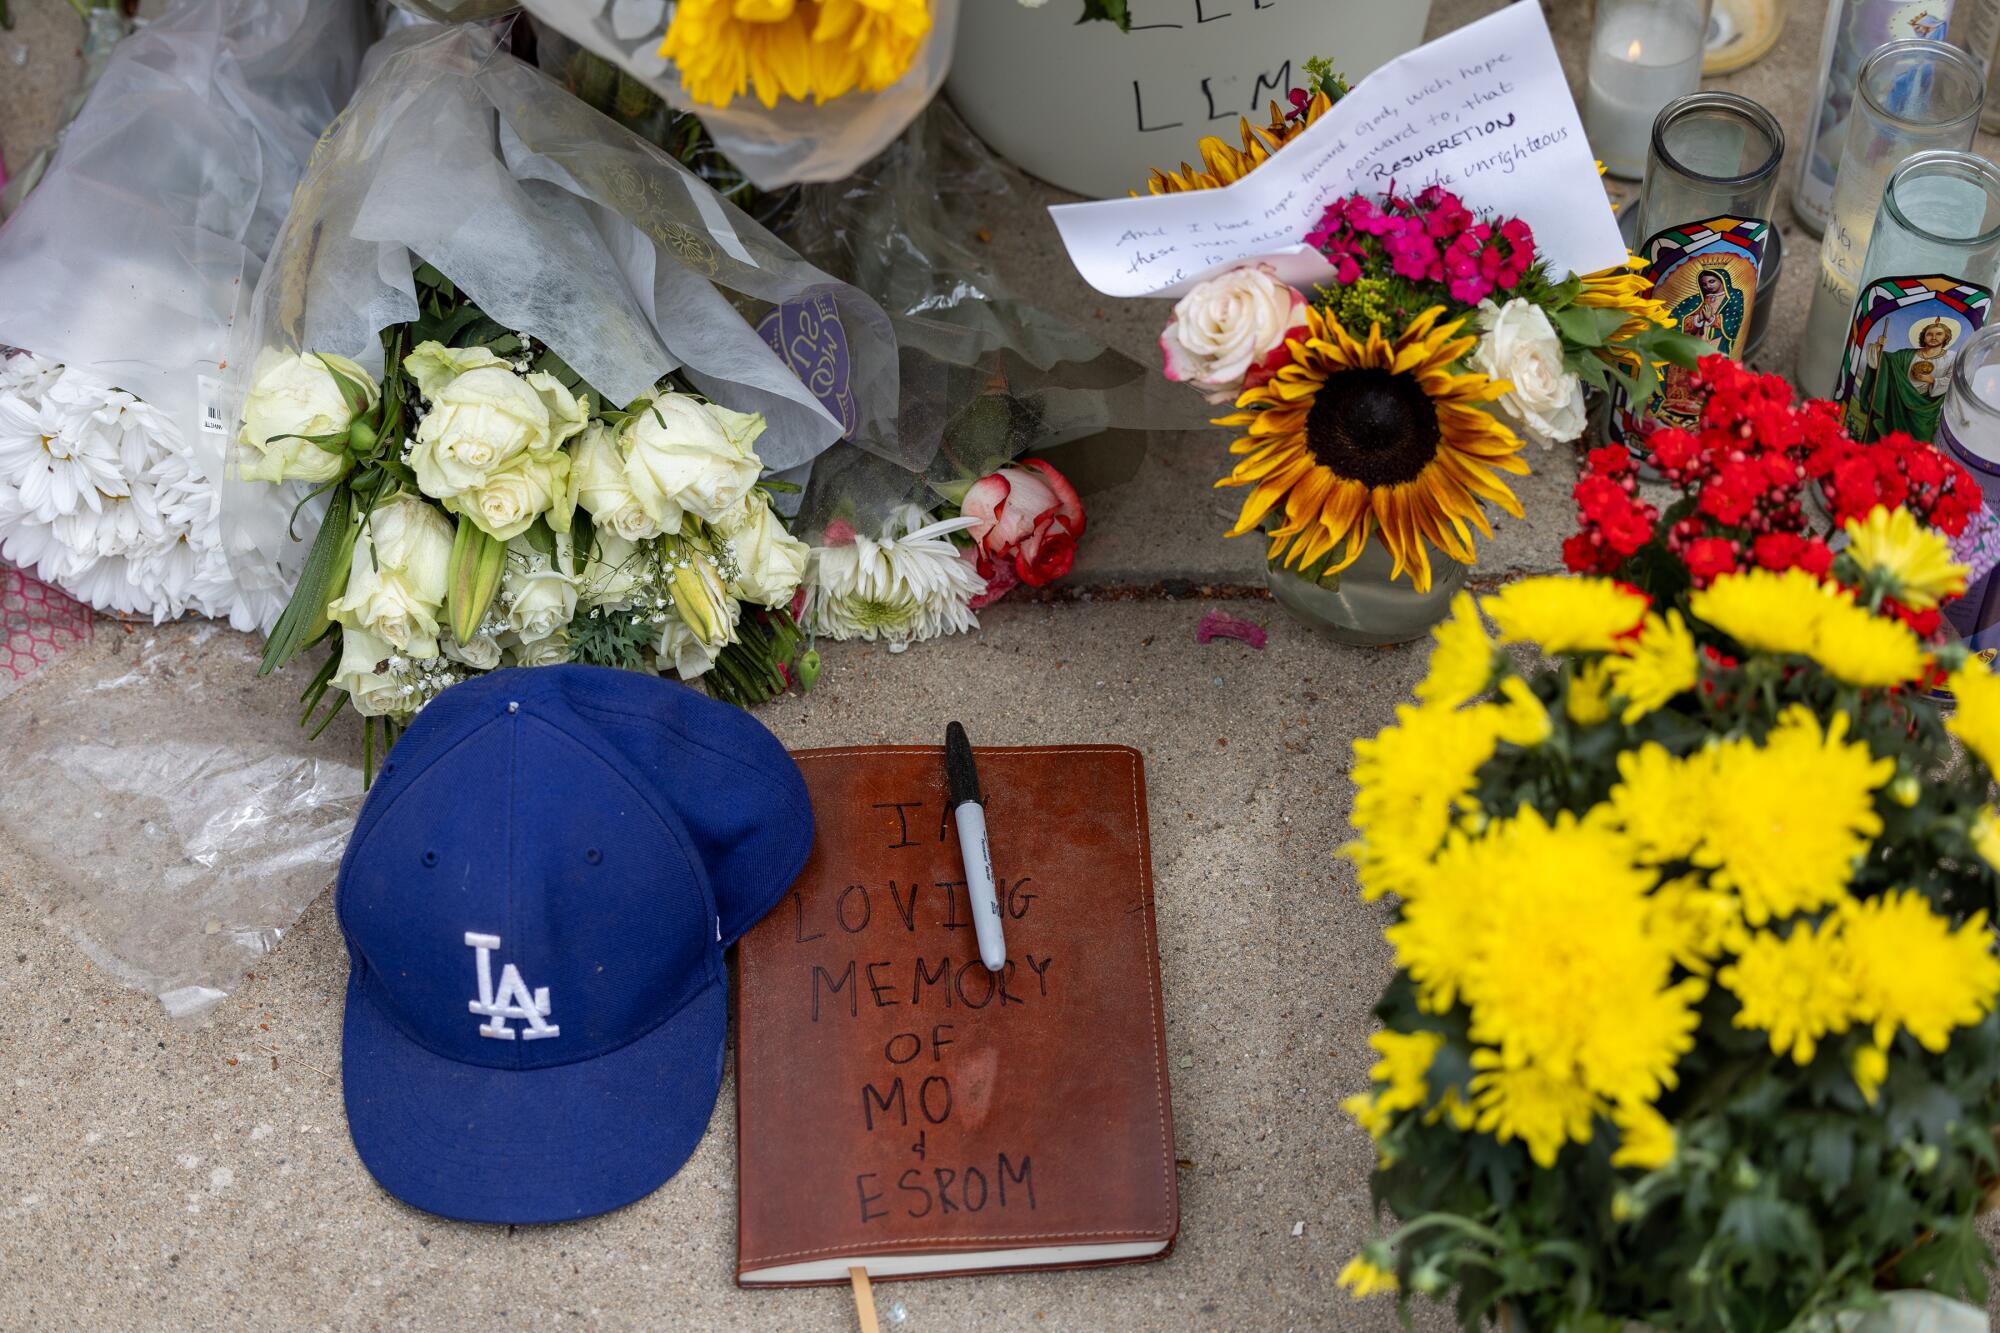 A sidewalk memorial featuring flowers, notes and a Dodgers hat